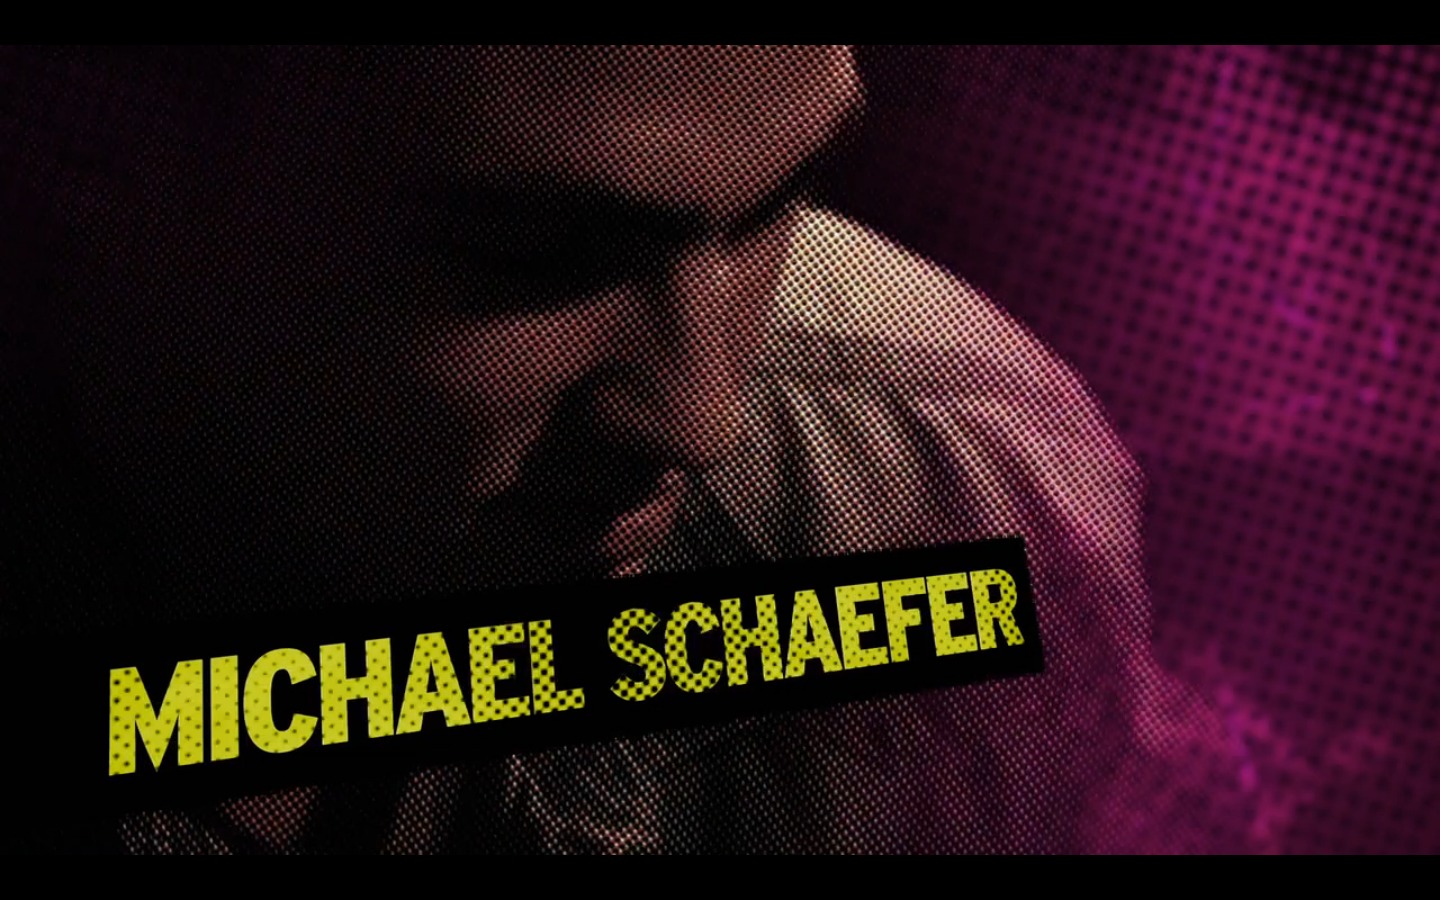 Andre featured as Michael Schaefer in the 2nd season premiere of 'Tabloid.'